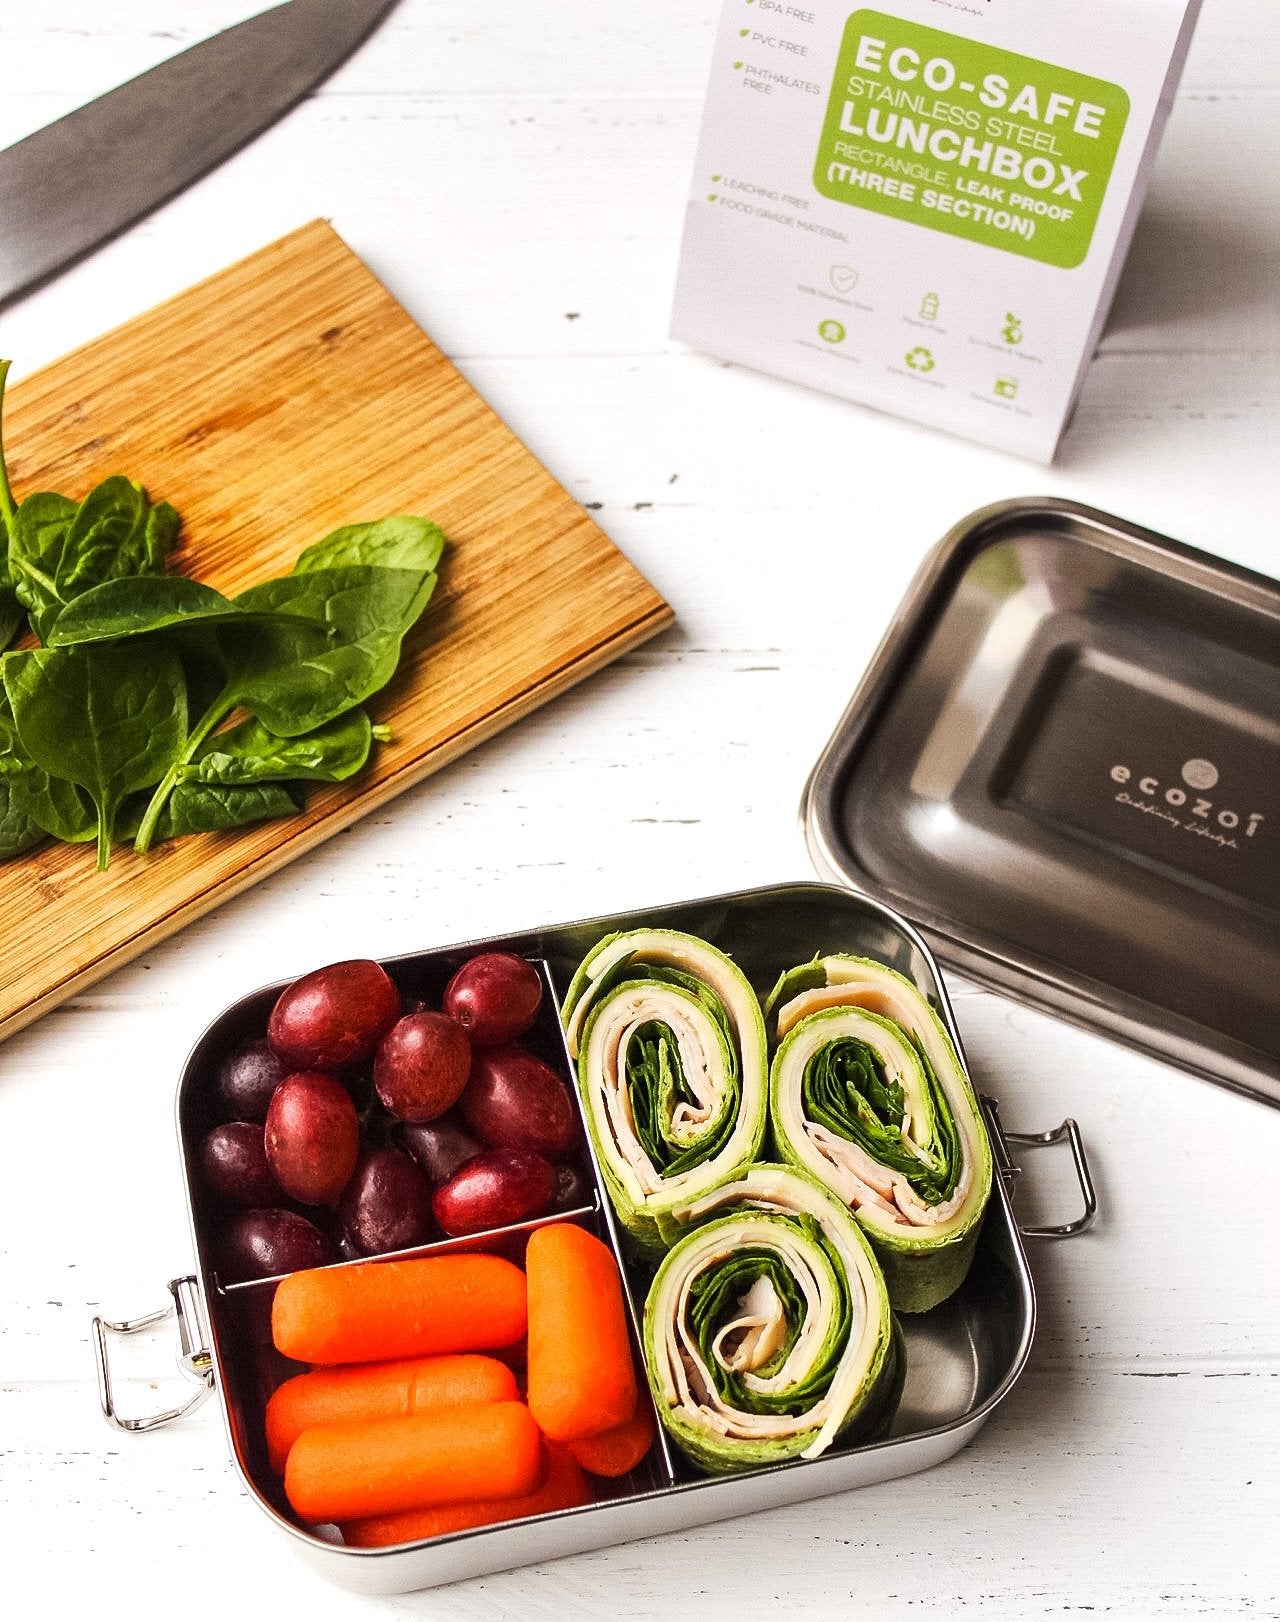 Leakproof & eco-friendly! ecozoi 3-compartment Bento Box - stainless steel, BPA-free, dishwasher safe, holds 24oz, includes sauce container. Pack lunches, ditch plastic, go green! Shop now!